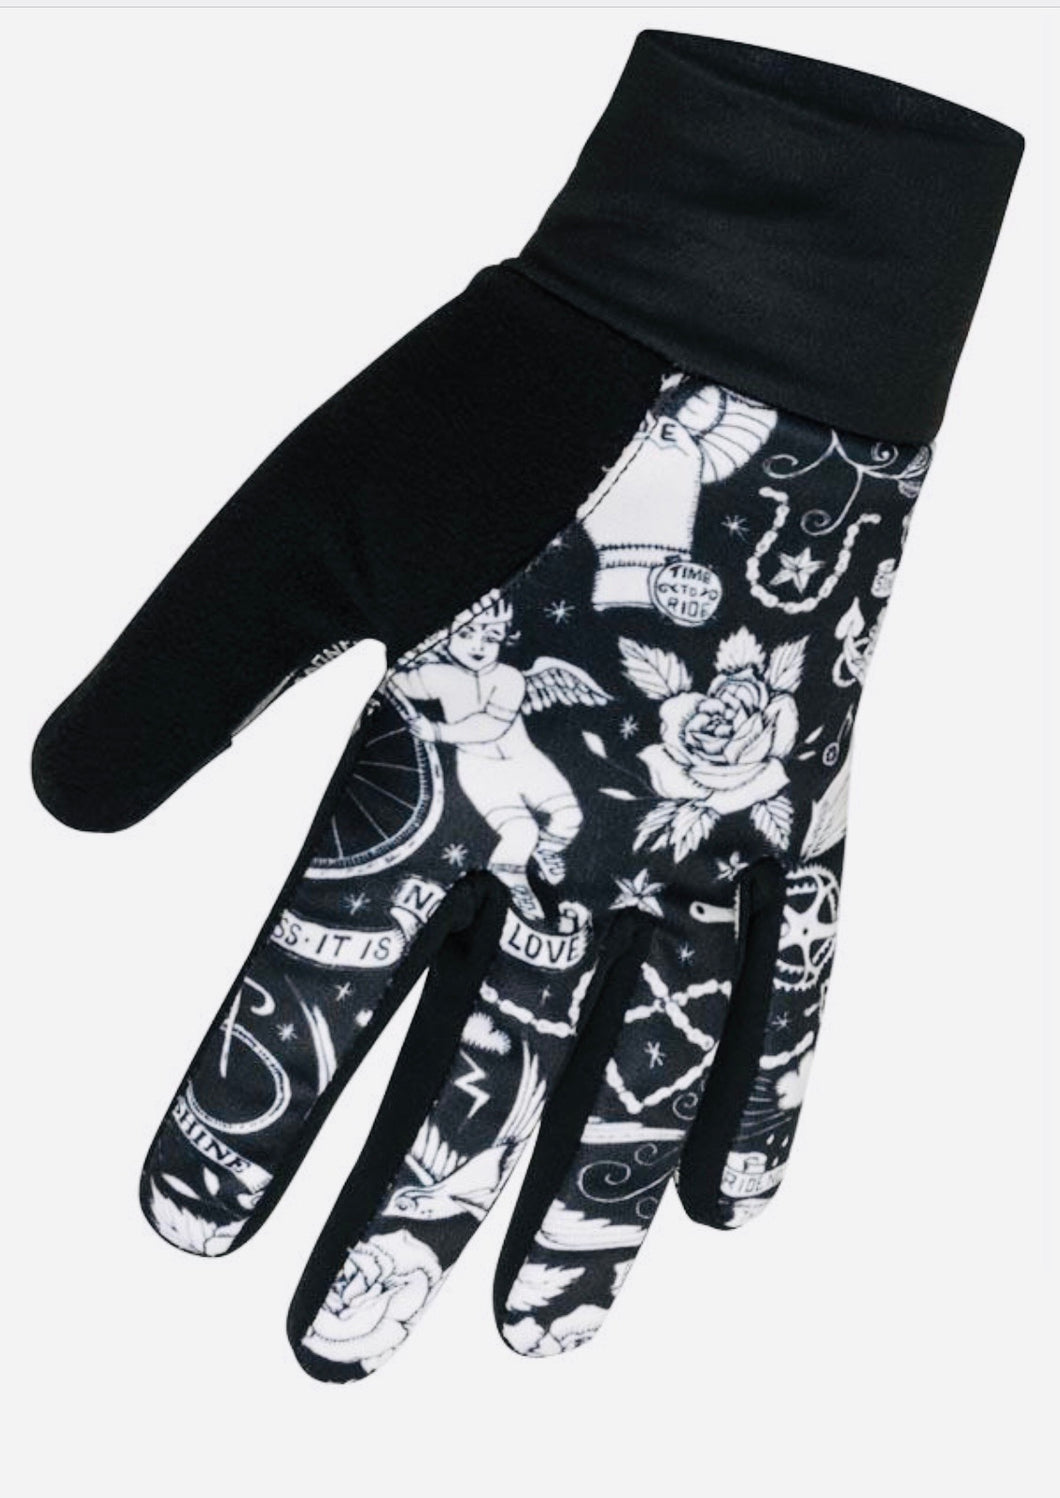 Cycology Quality Unisex Long-Fingered Cycling Gloves - Design Tattoo